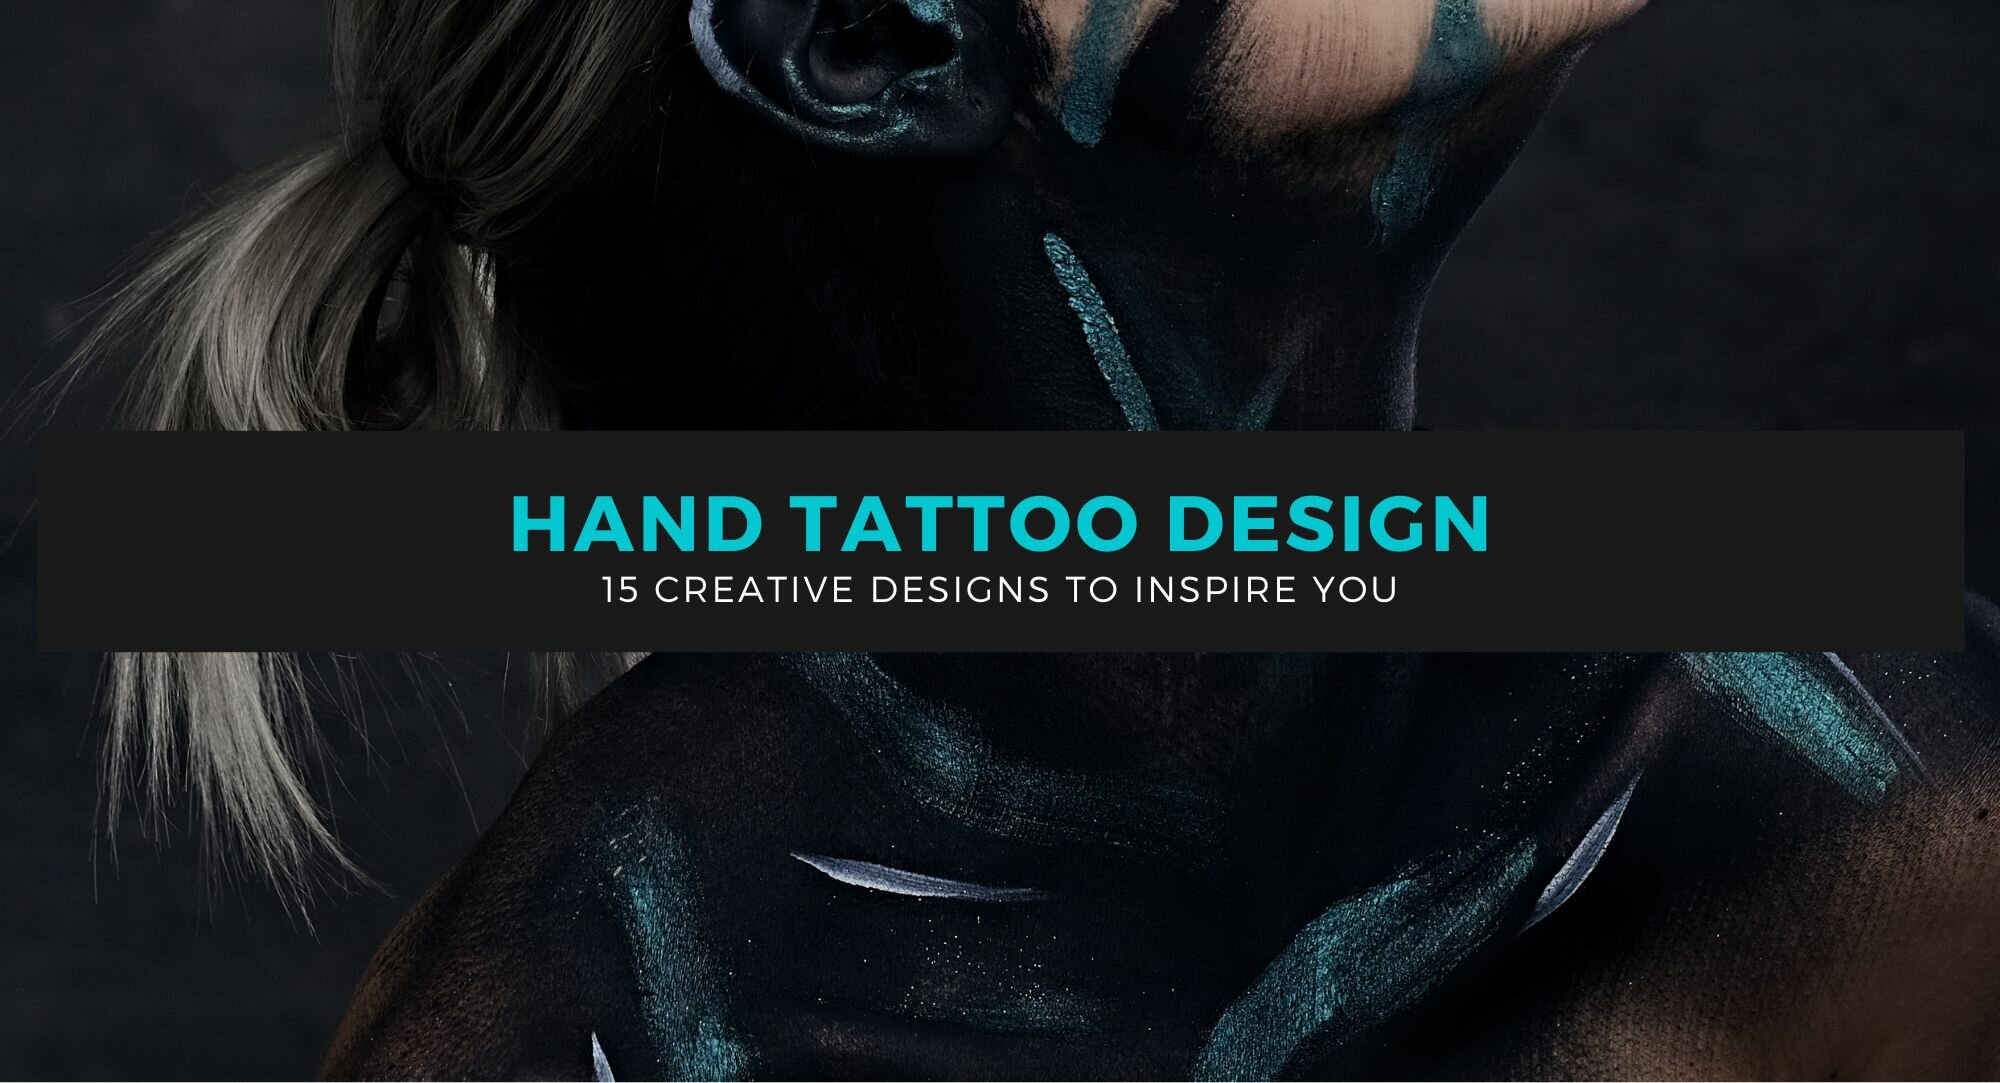 Trending Hand Tattoo Ideas: 15 Creative Designs to Inspire You